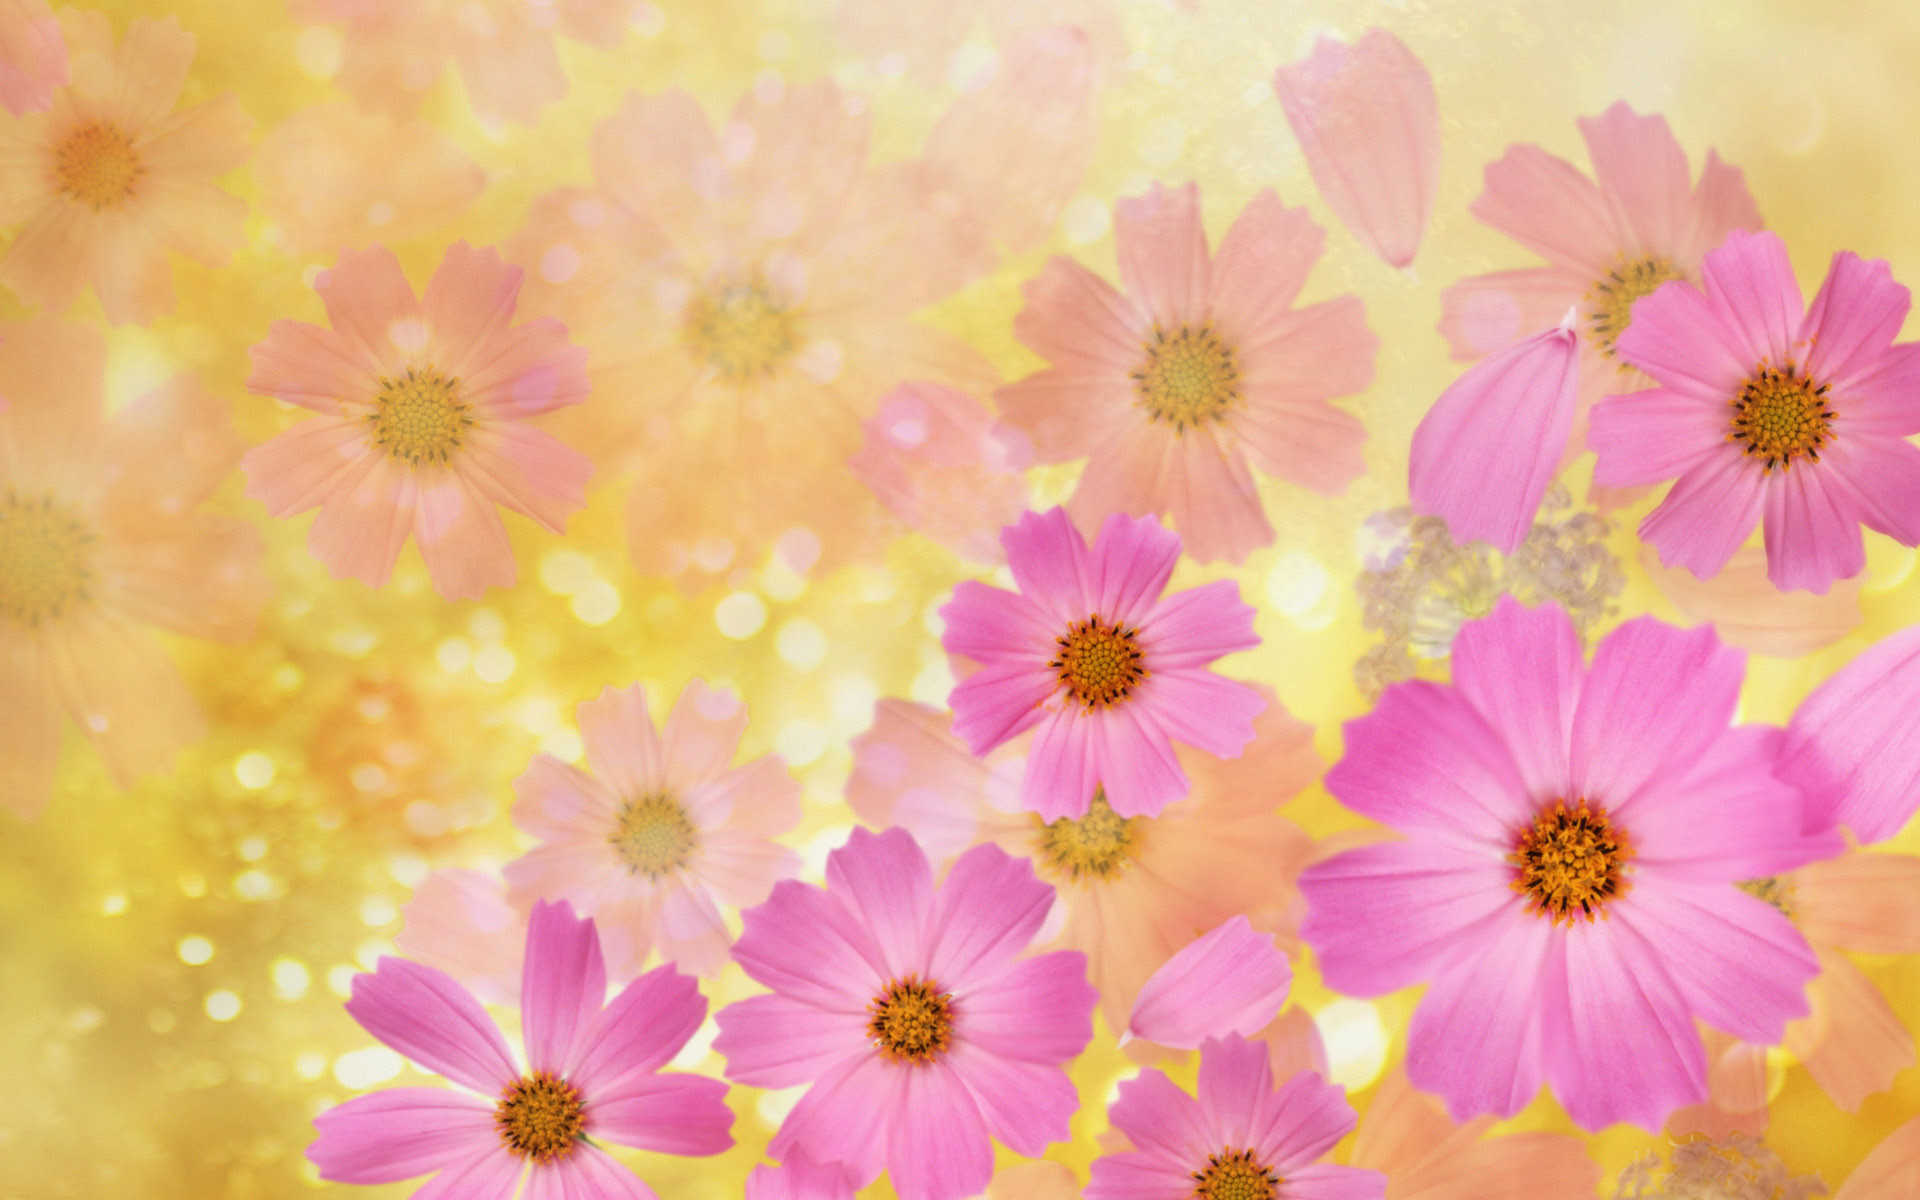 Widescreen HD Wallpaper > Themes > Beautiful spring flowers | High .” style=”width:100%”><figcaption style=